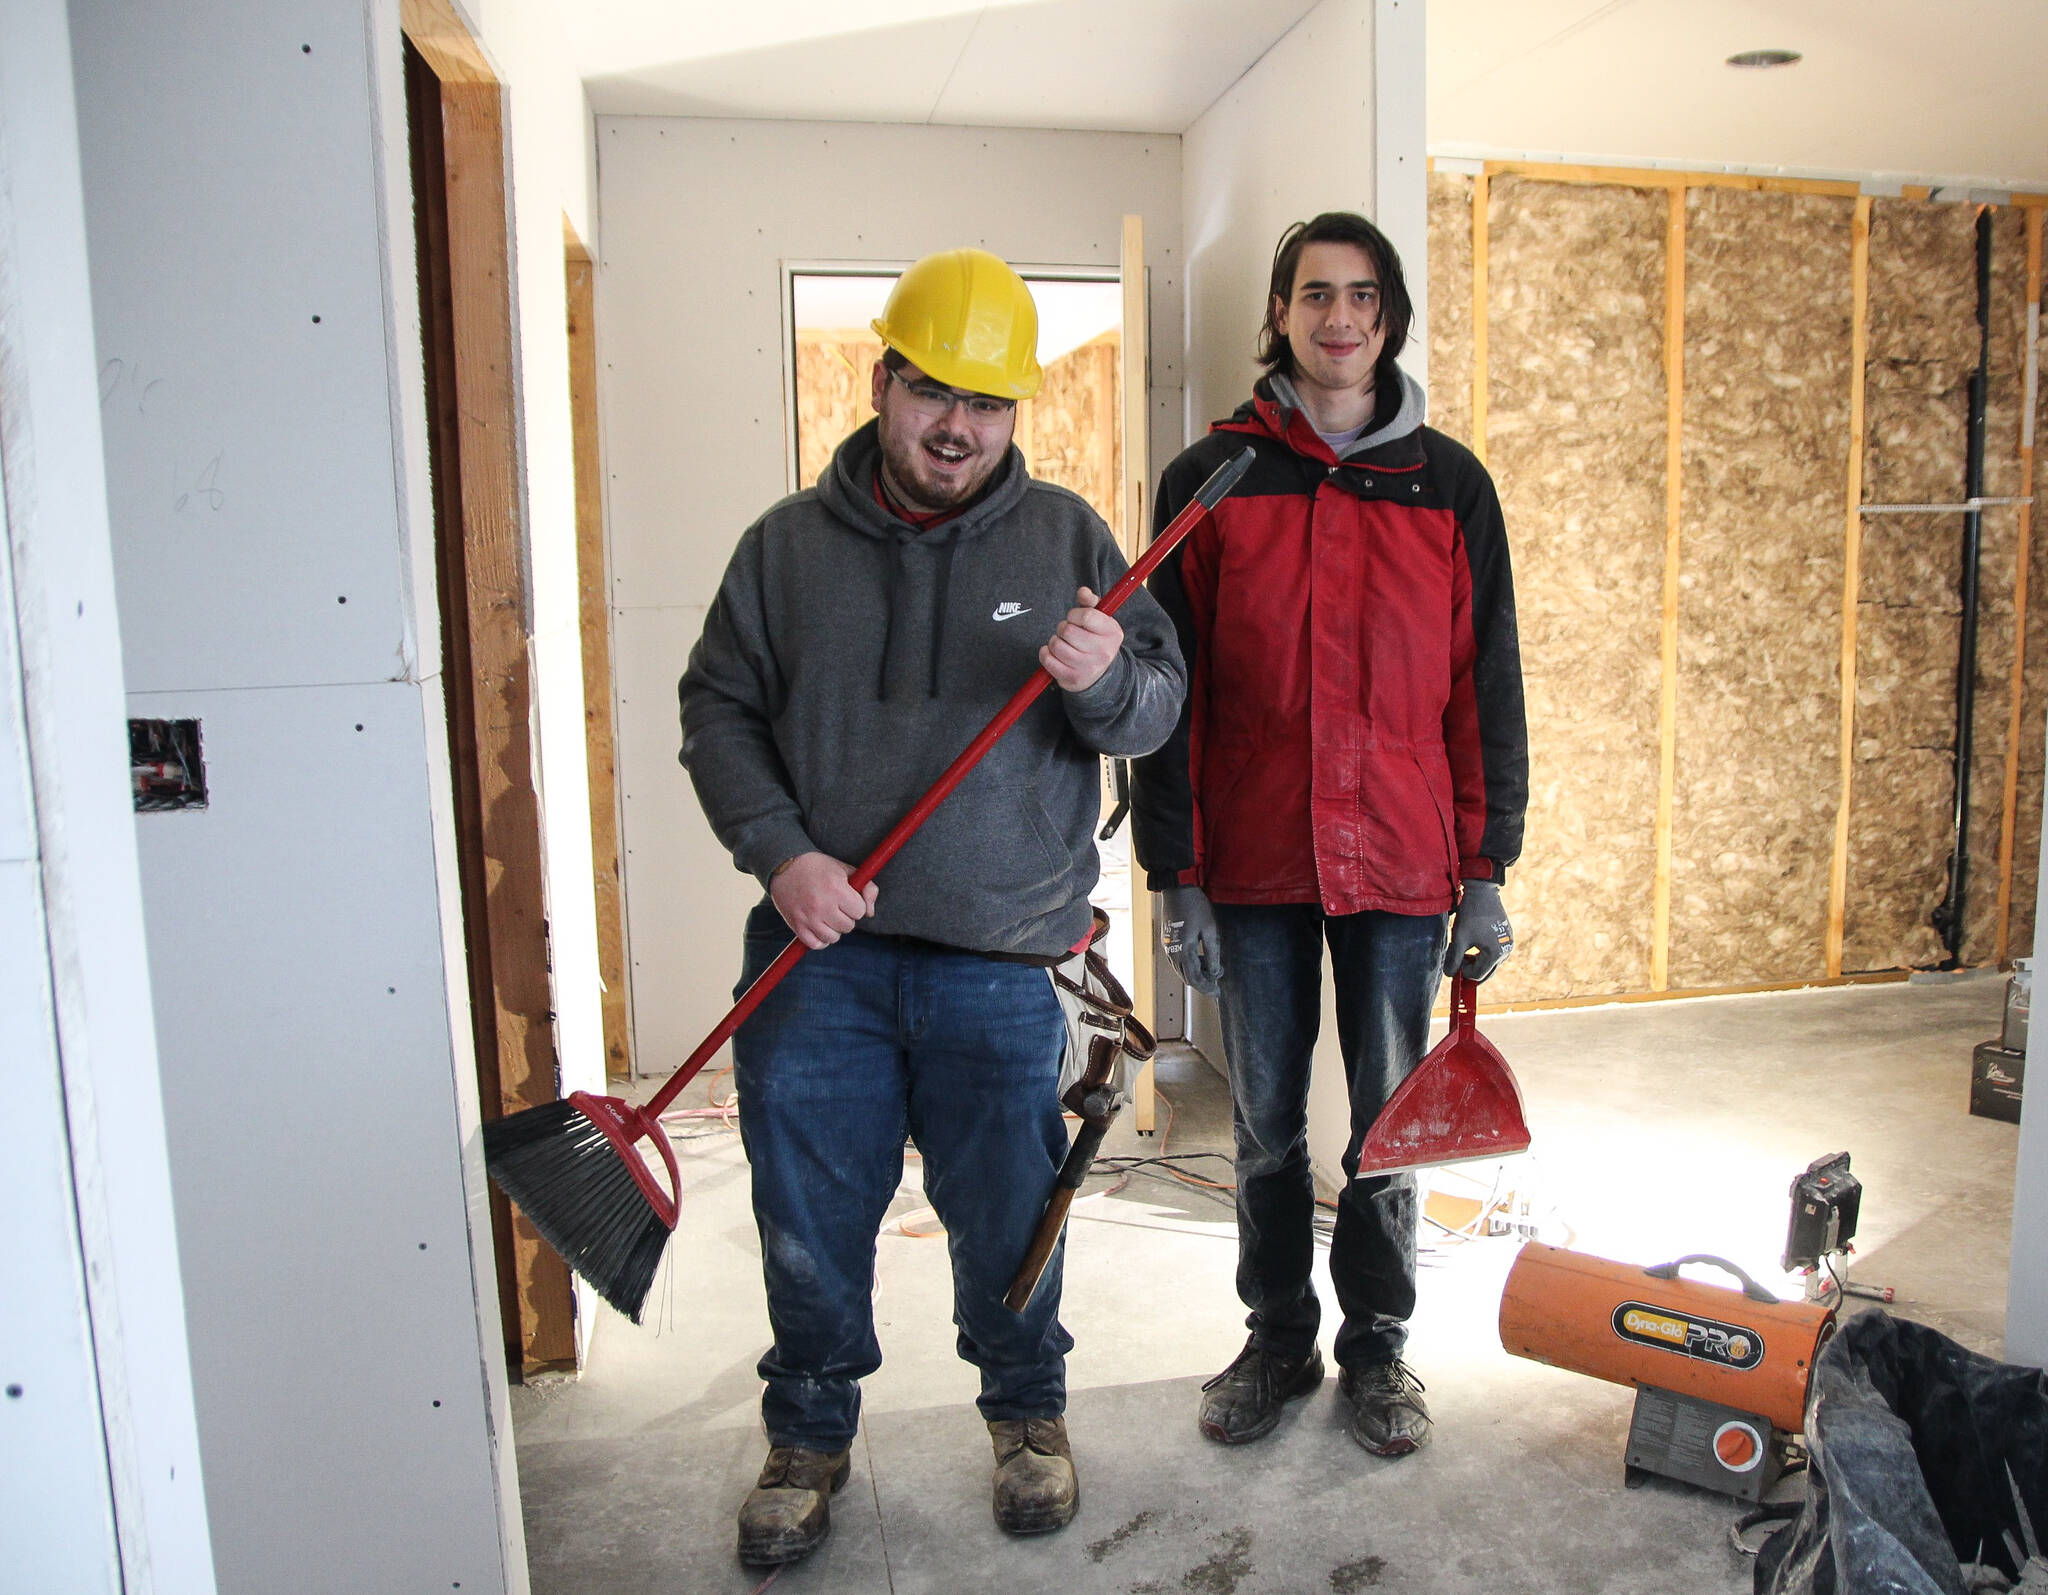 Photo by Luisa Loi
As interns from Exceptional Academy, Jonathan Shields (left) and Jonathan Brady (right) are learning construction skills that might help them secure a job in construction in the future.